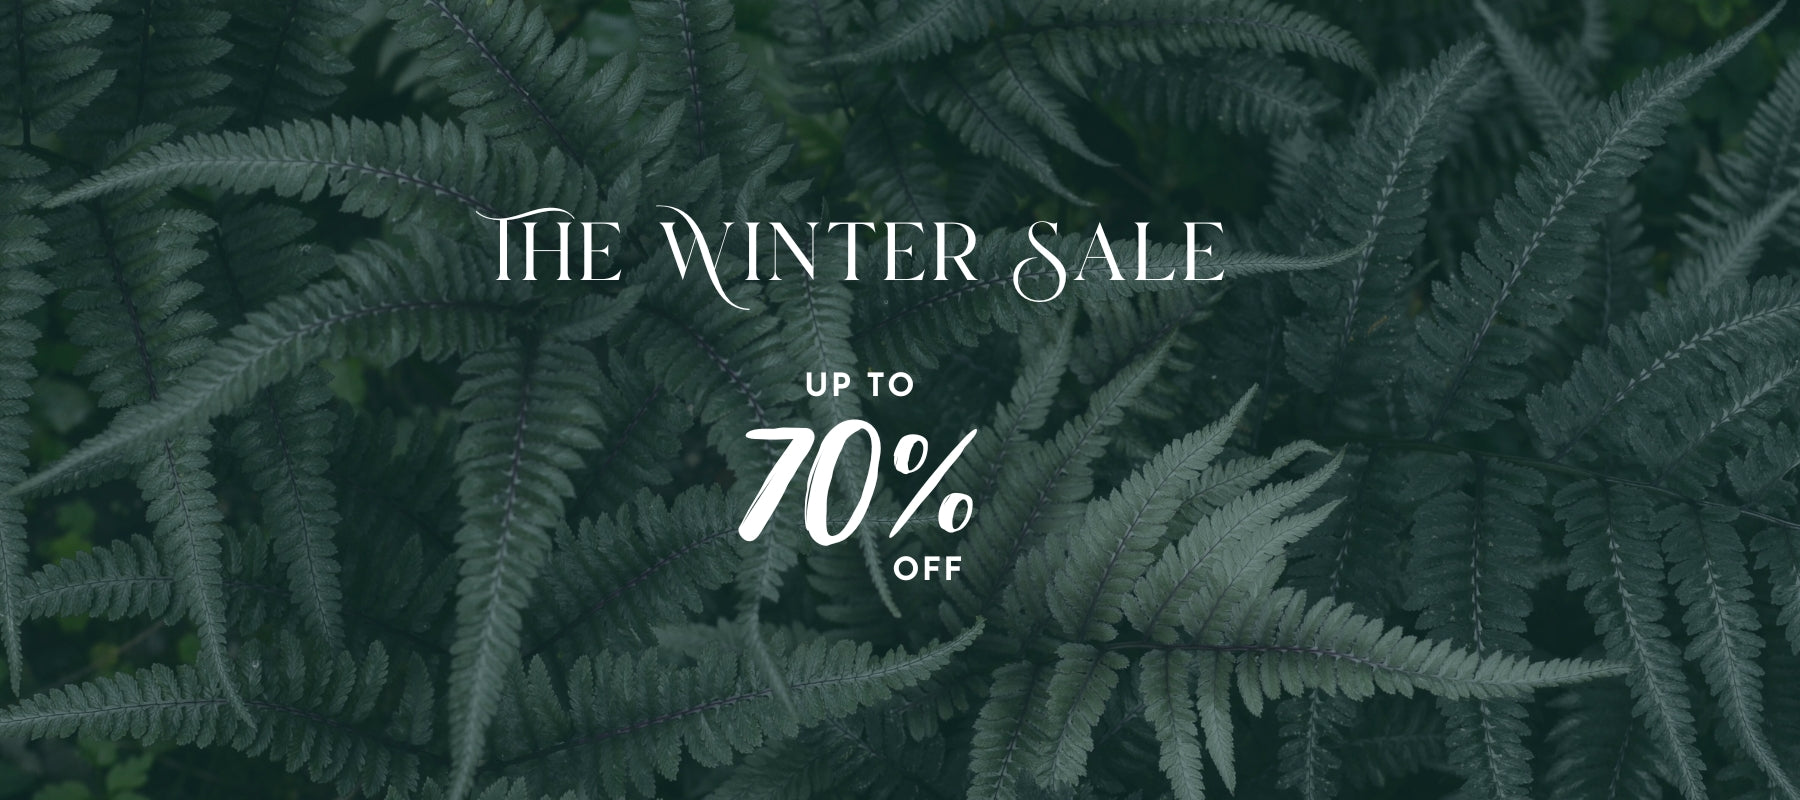 The Winter sale - up to 70% off